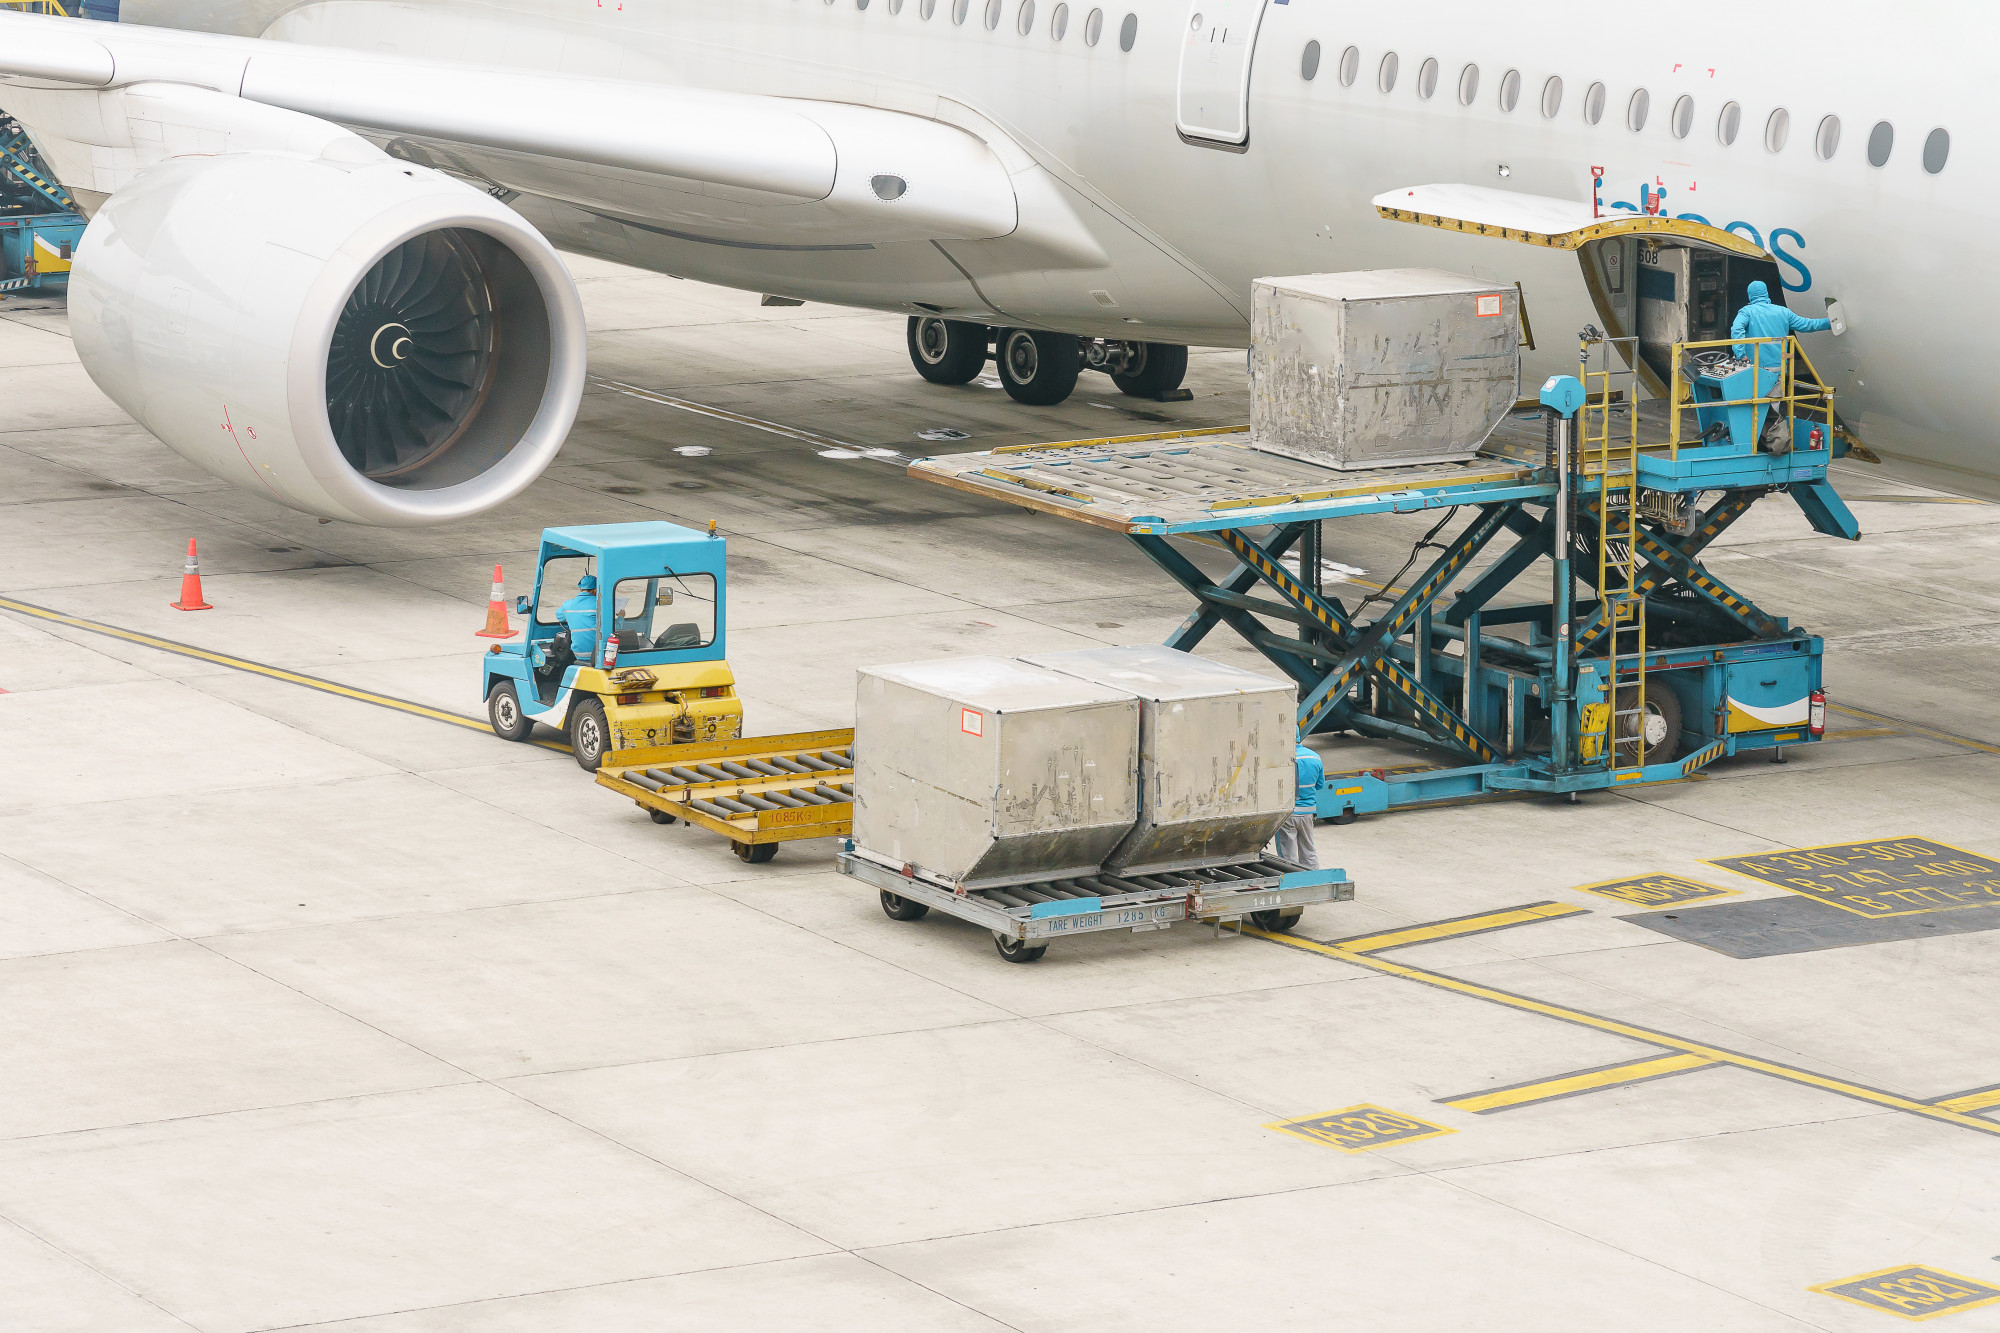 Loading platform of air freight to the aircraft. food for flight check-in services and equipment